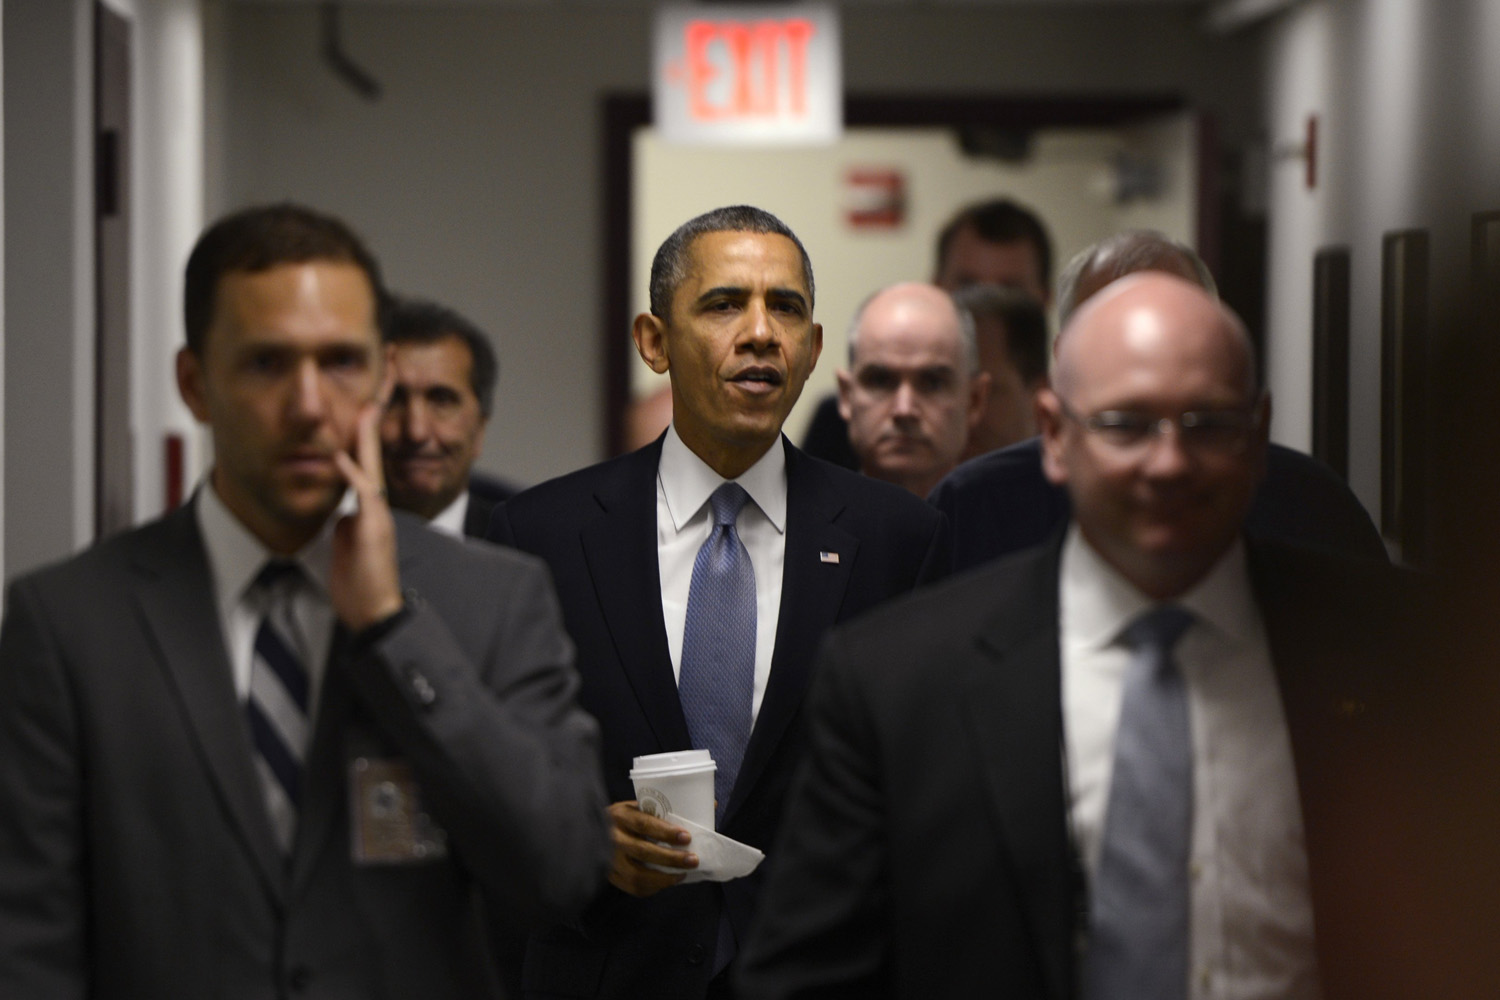 President Obama visits FEMA and delivers rtemarks on the Government Shutdown.